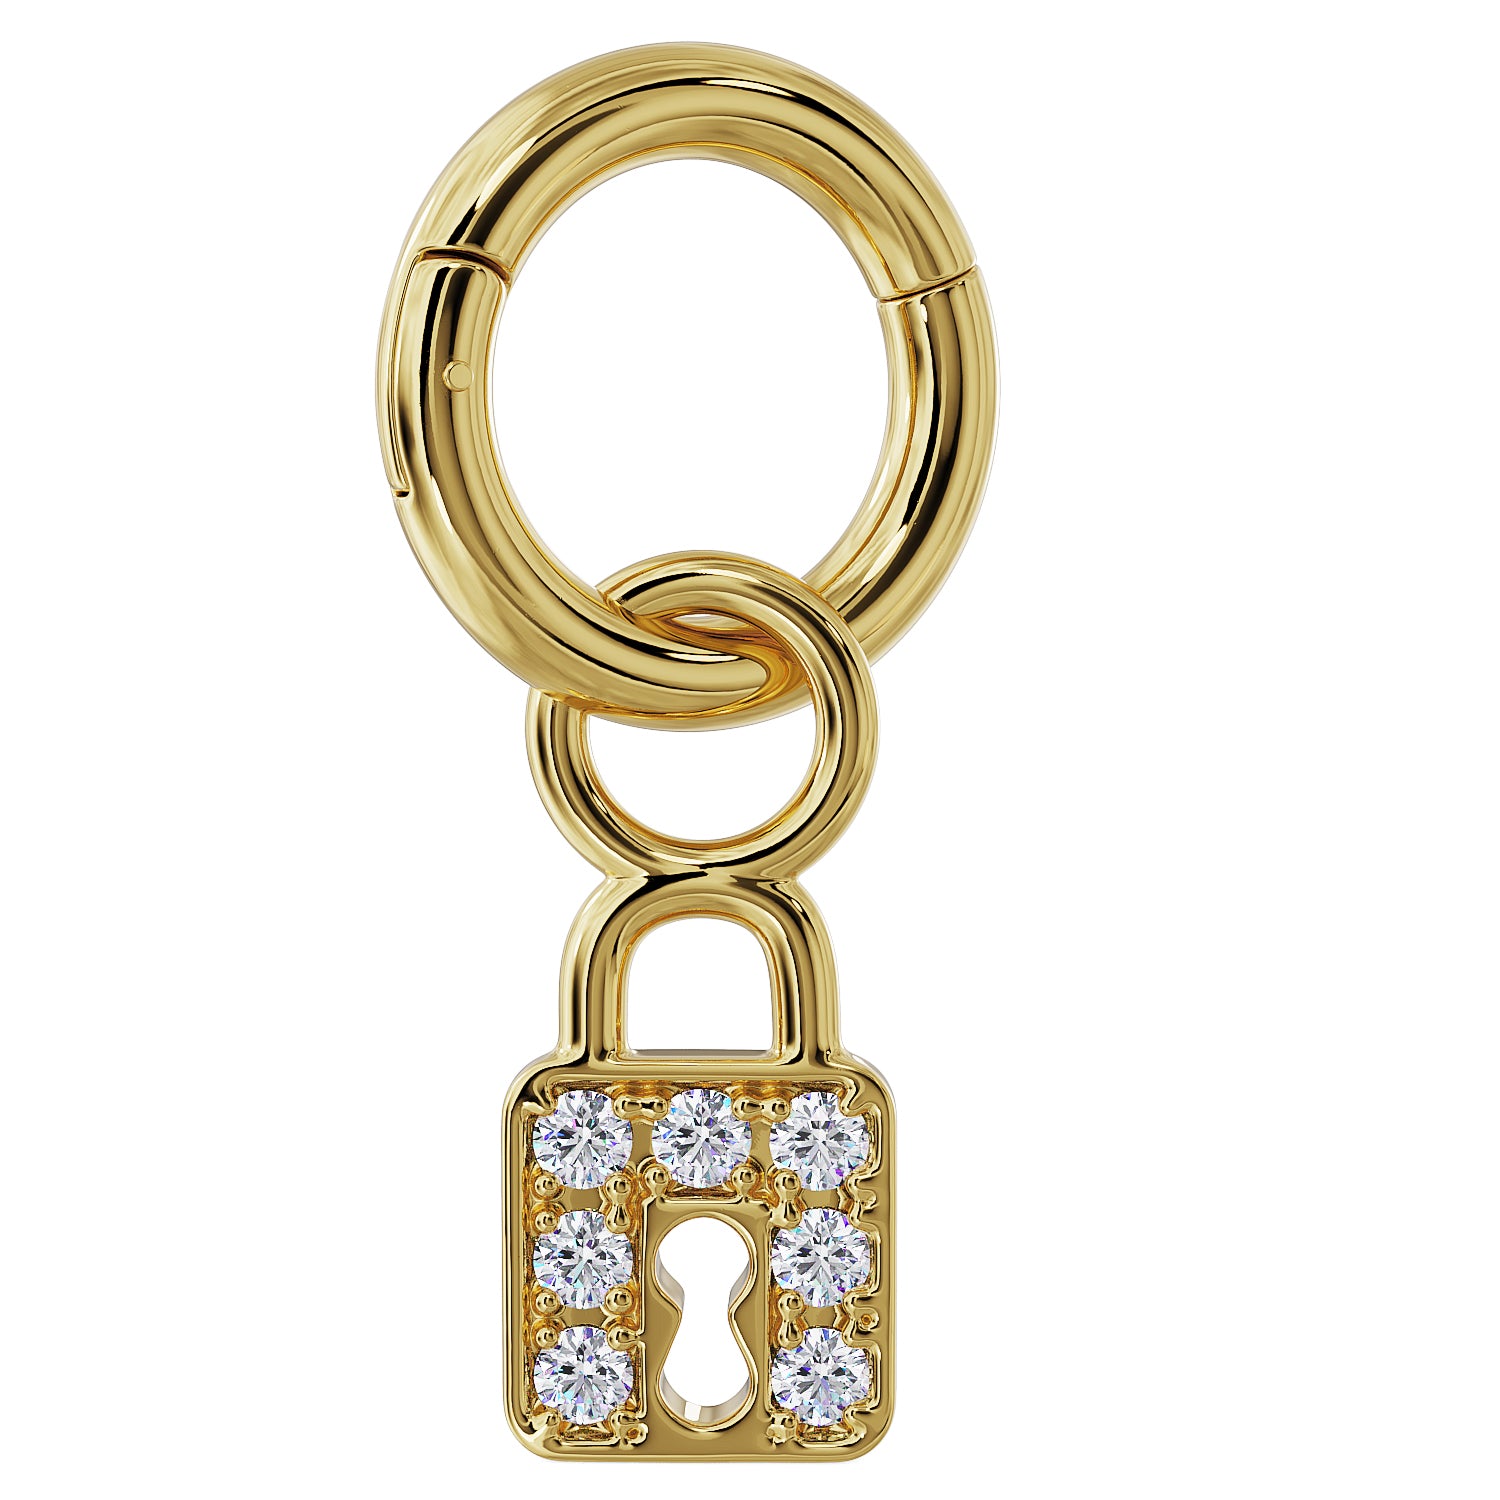 Clicker Ring & Gold Lock Diamond Charm Accessory For Piercing Jewelry